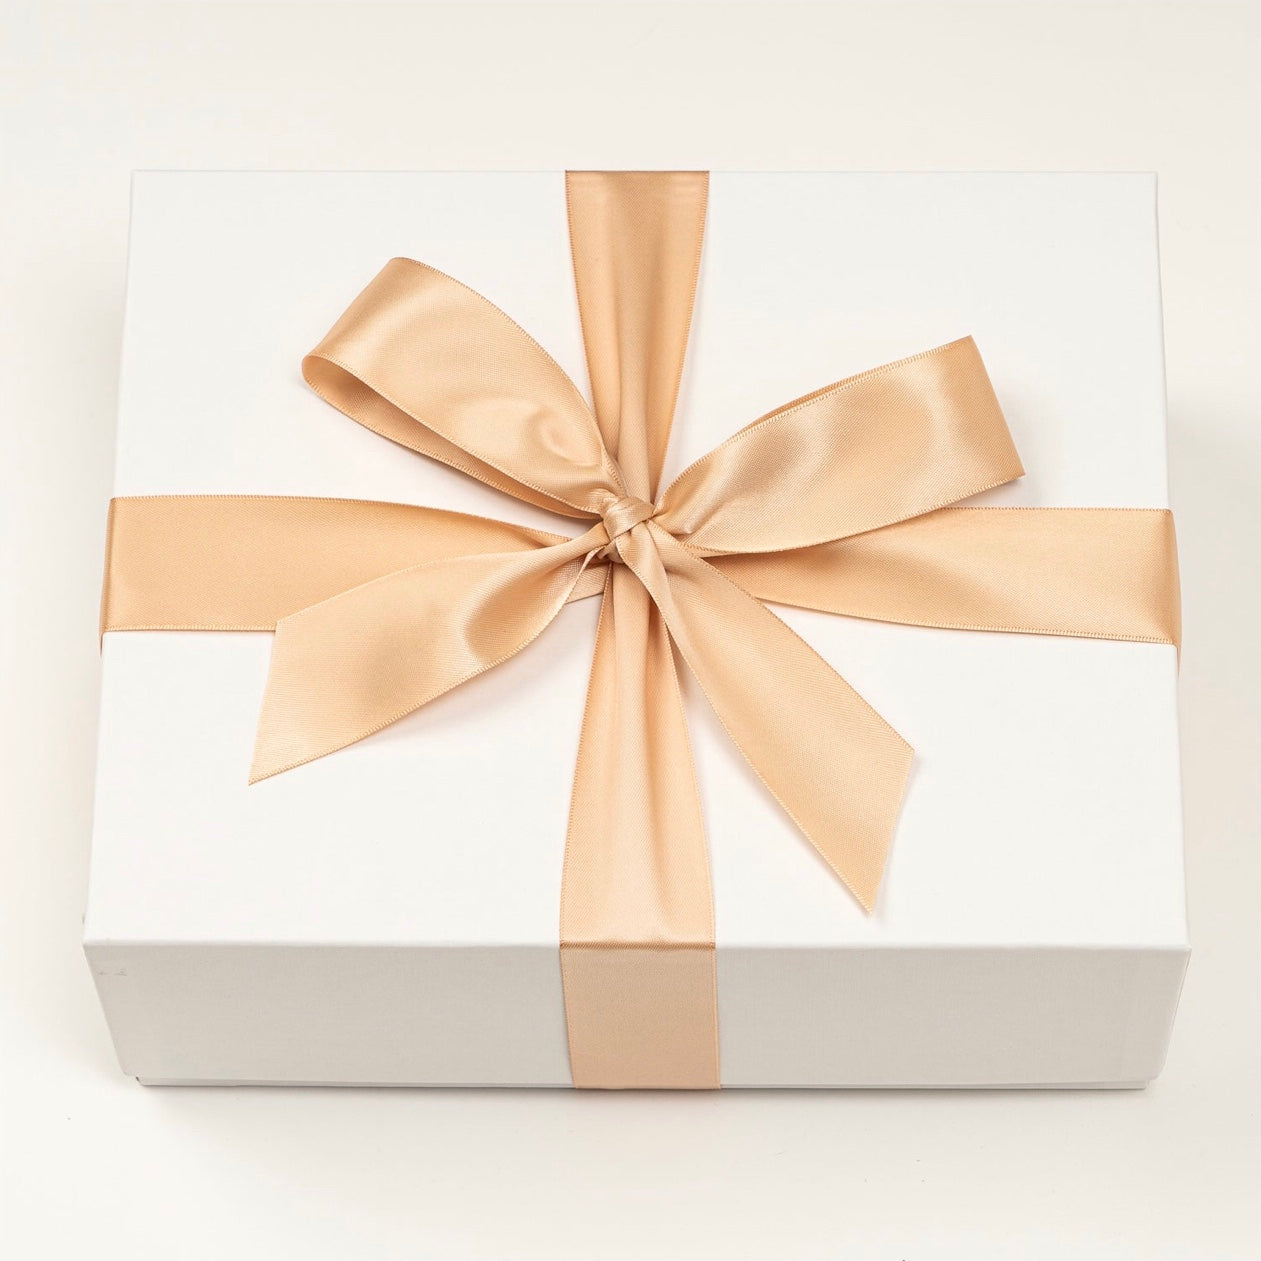 Build Your Own Gift Box